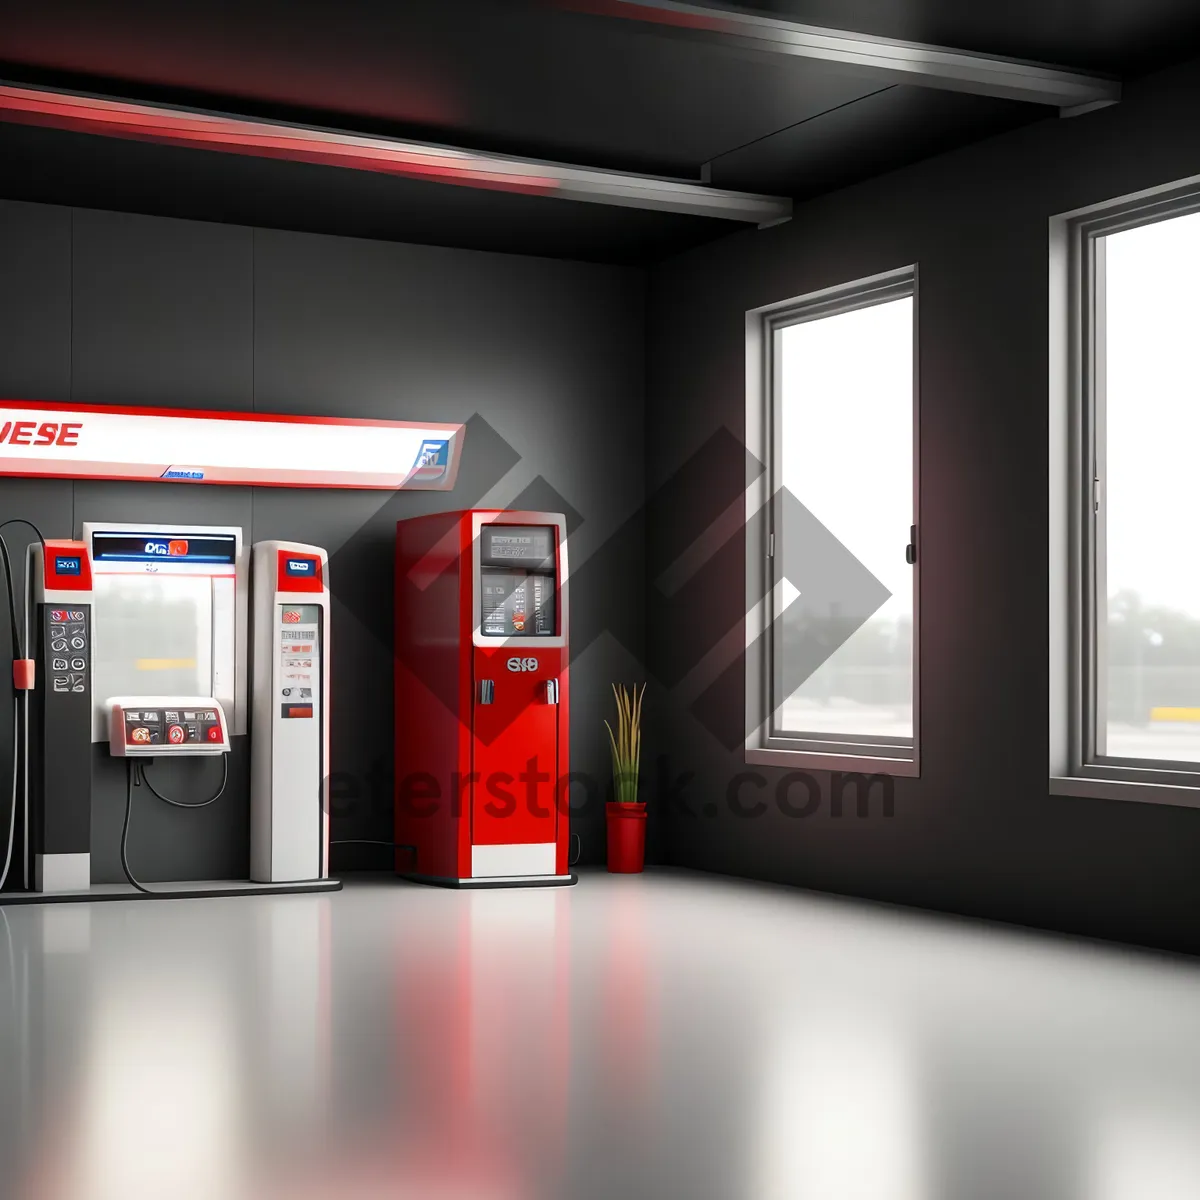 Picture of Advanced 3D Cash Machine Device for Interior Business